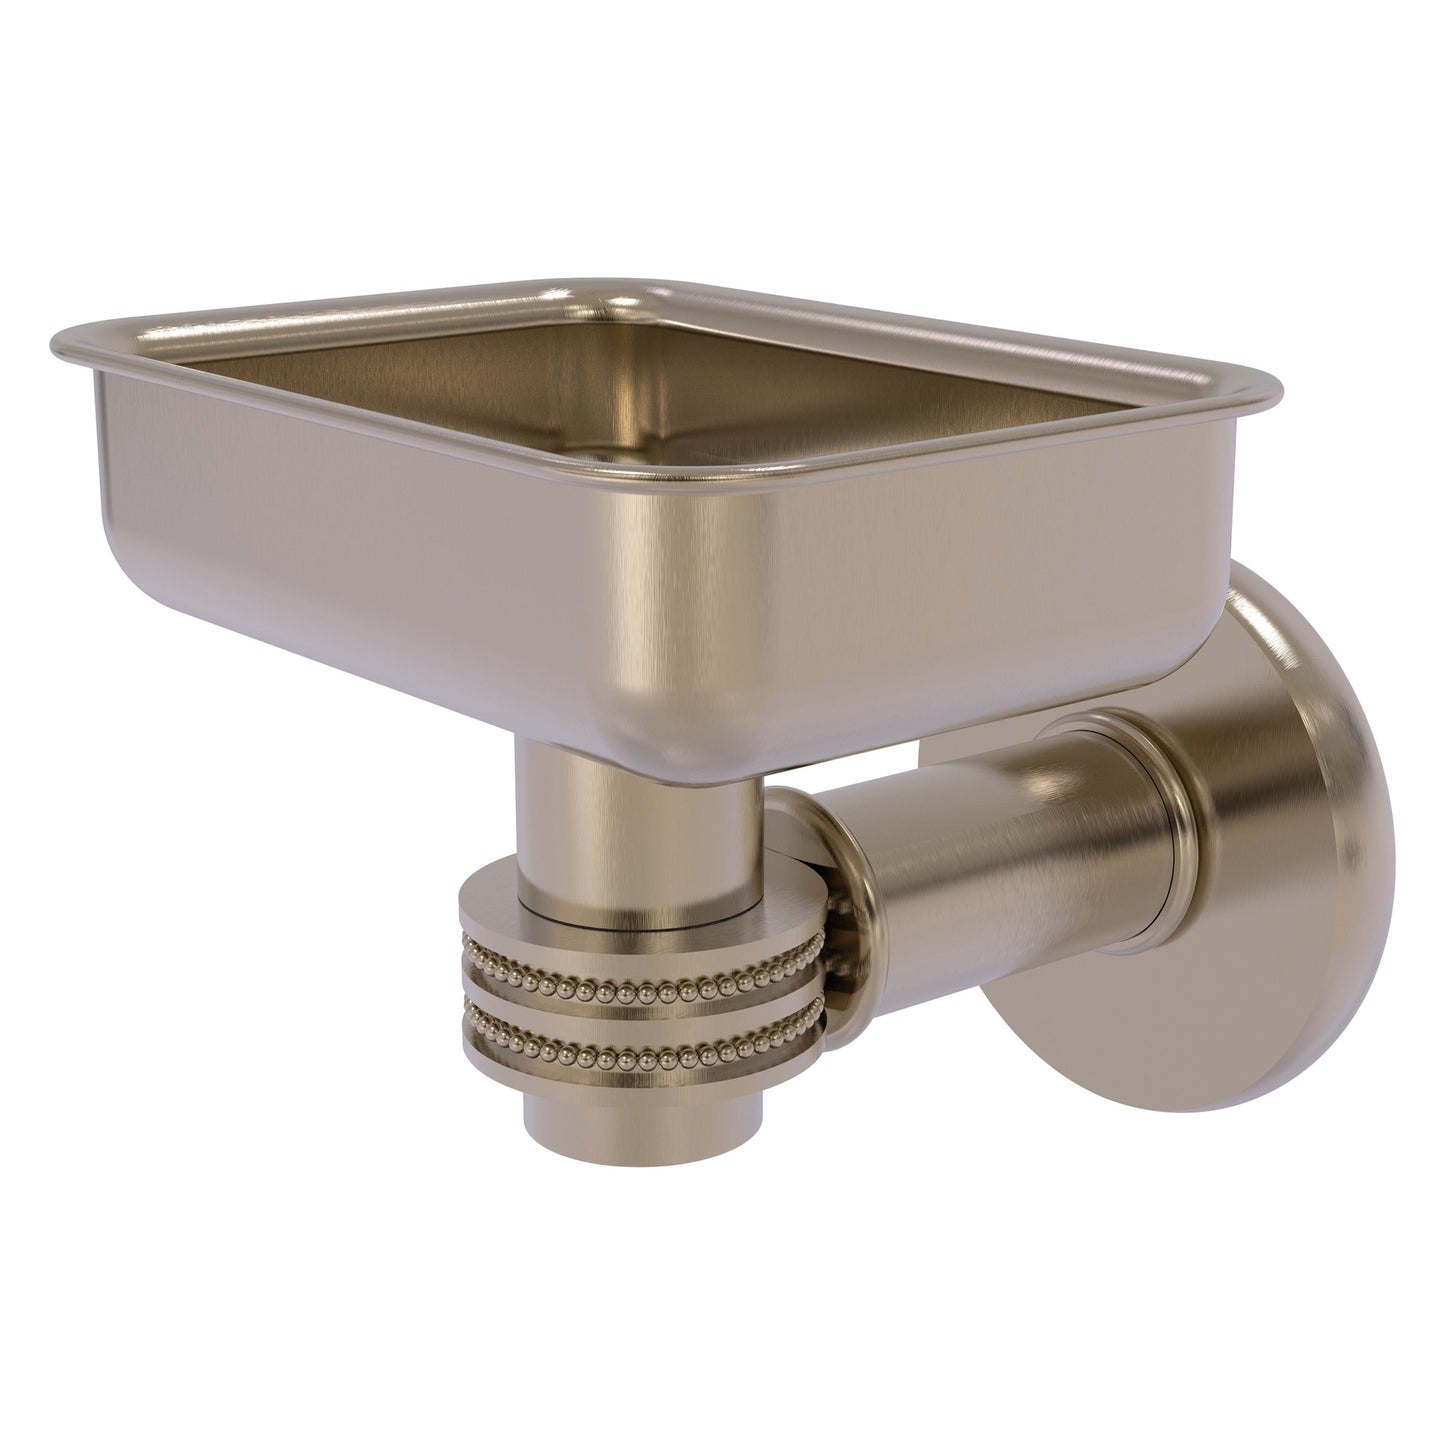 Allied Brass Continental 4.5" x 3.5" Antique Pewter Solid Brass Wall-Mounted Soap Dish Holder with Dotted Accents